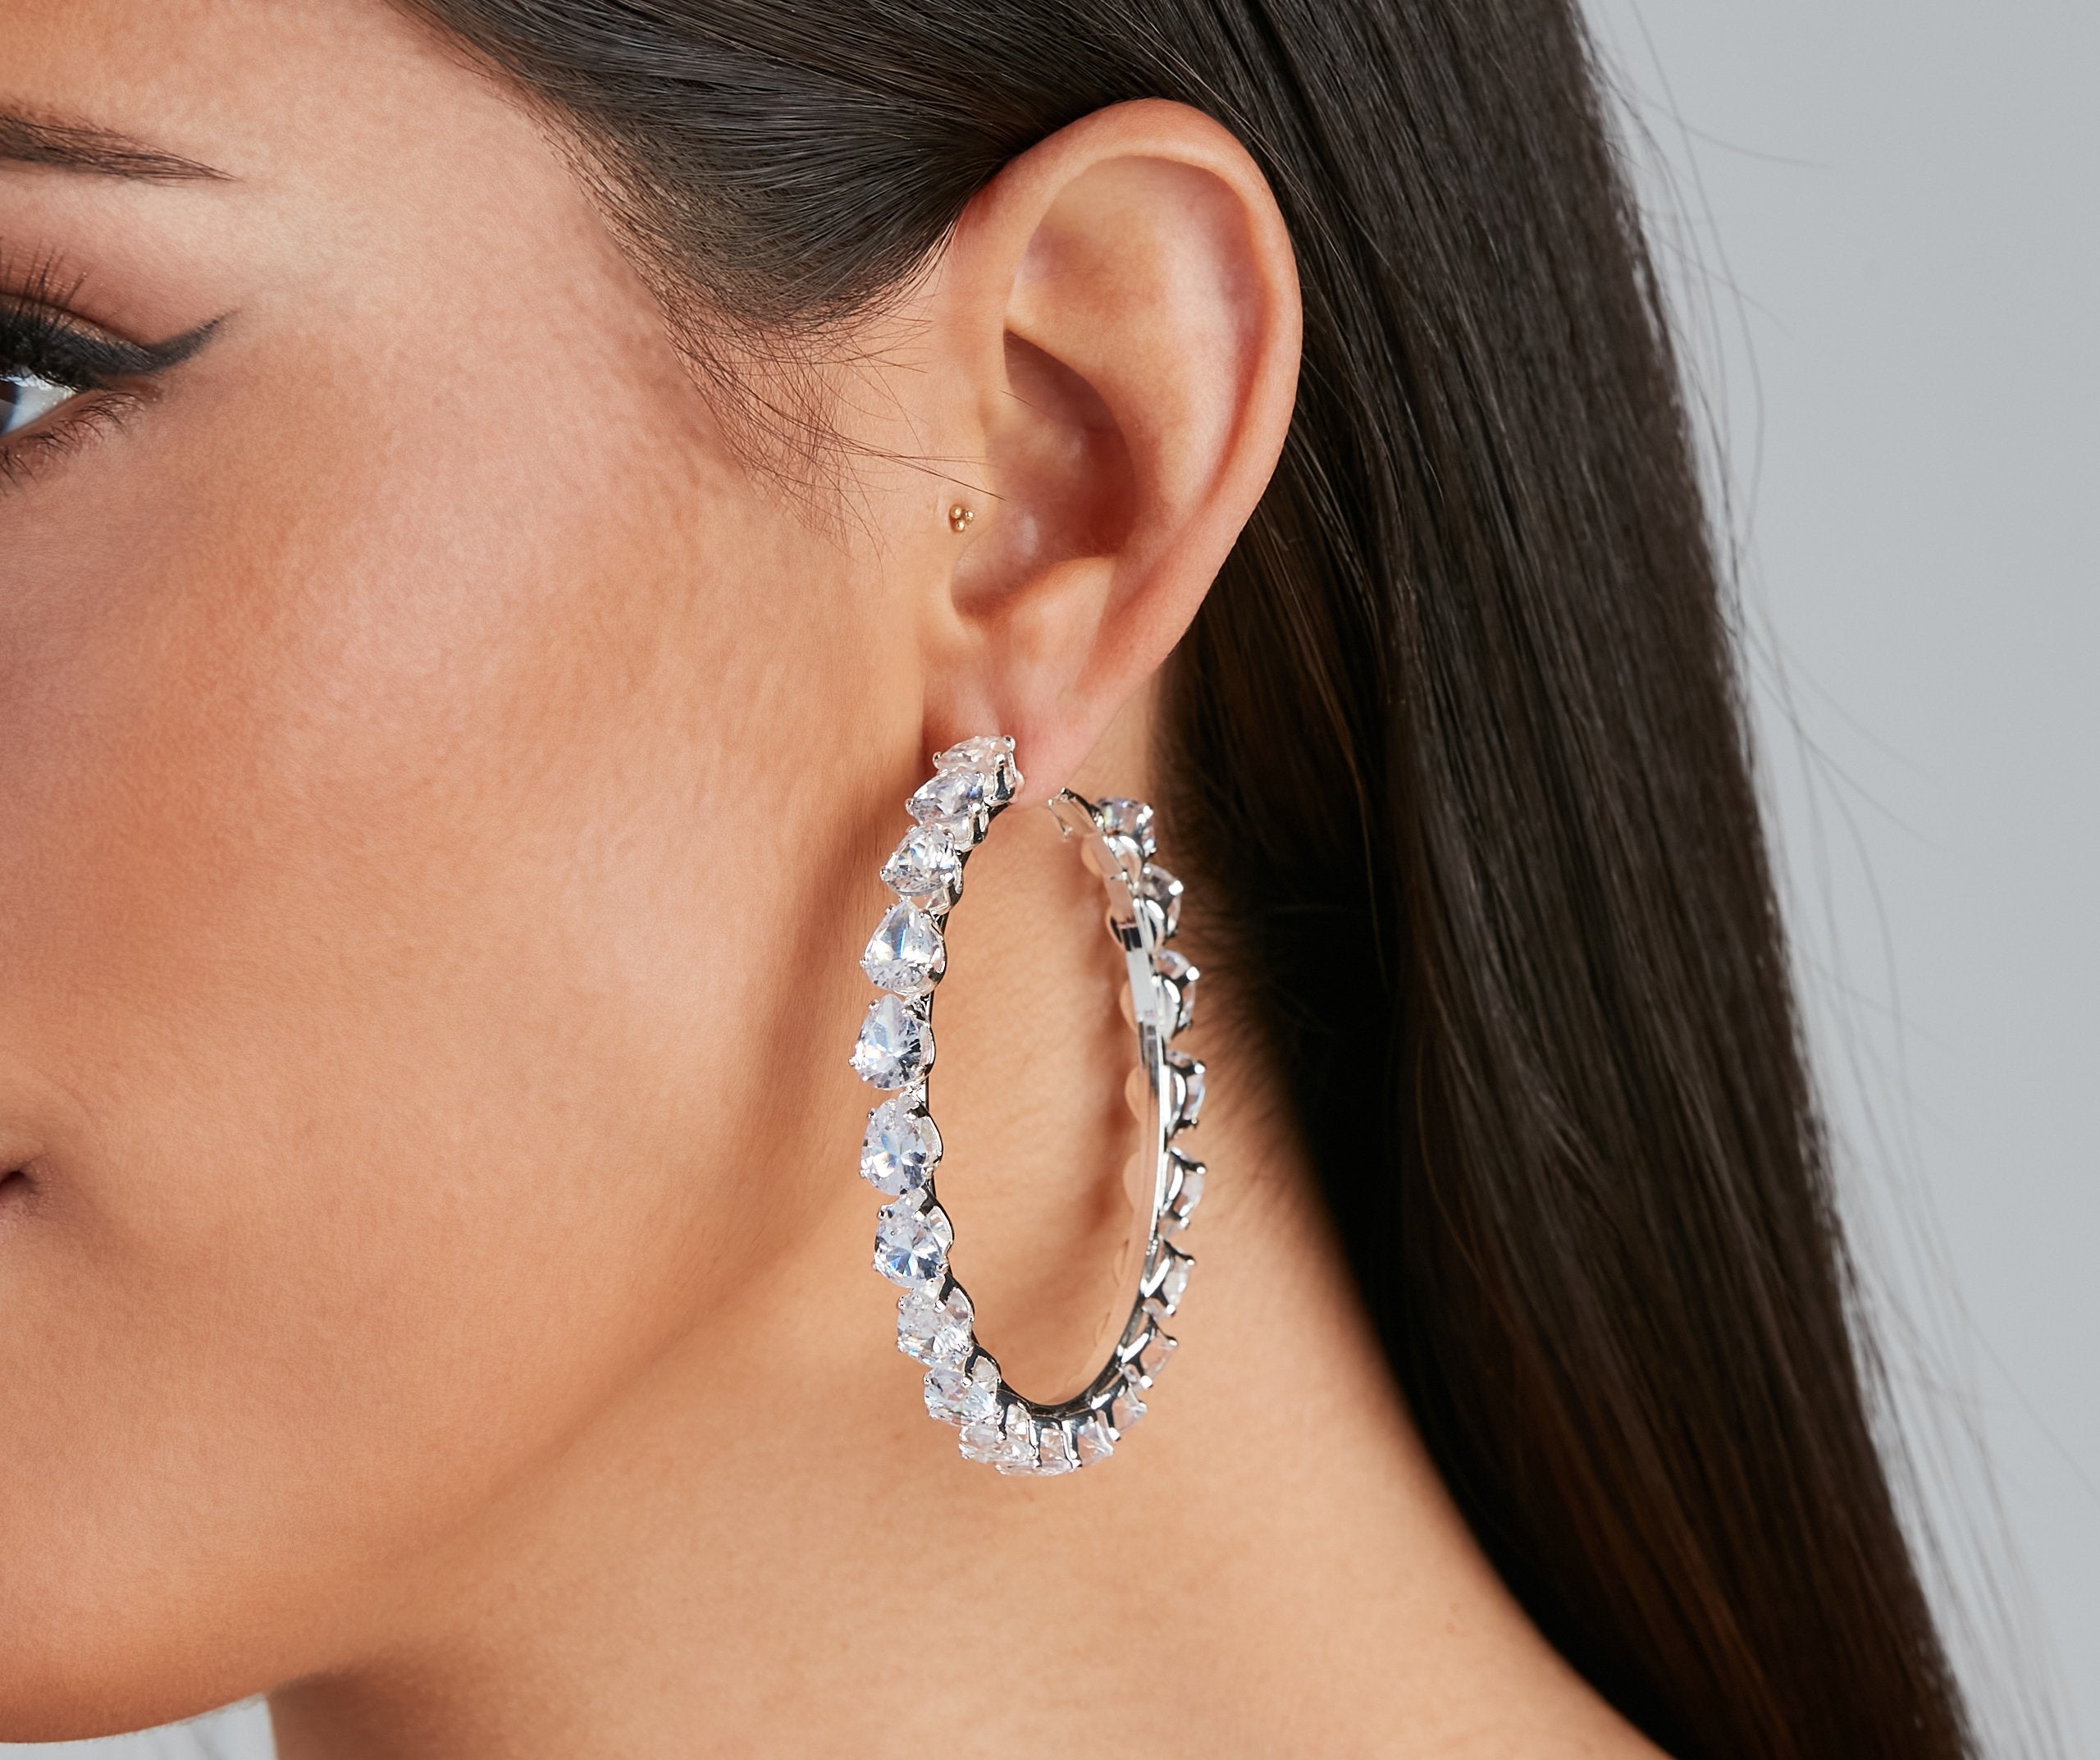 Glamorous Chic Cubic Zirconia Hoop Earrings - Lady Occasions